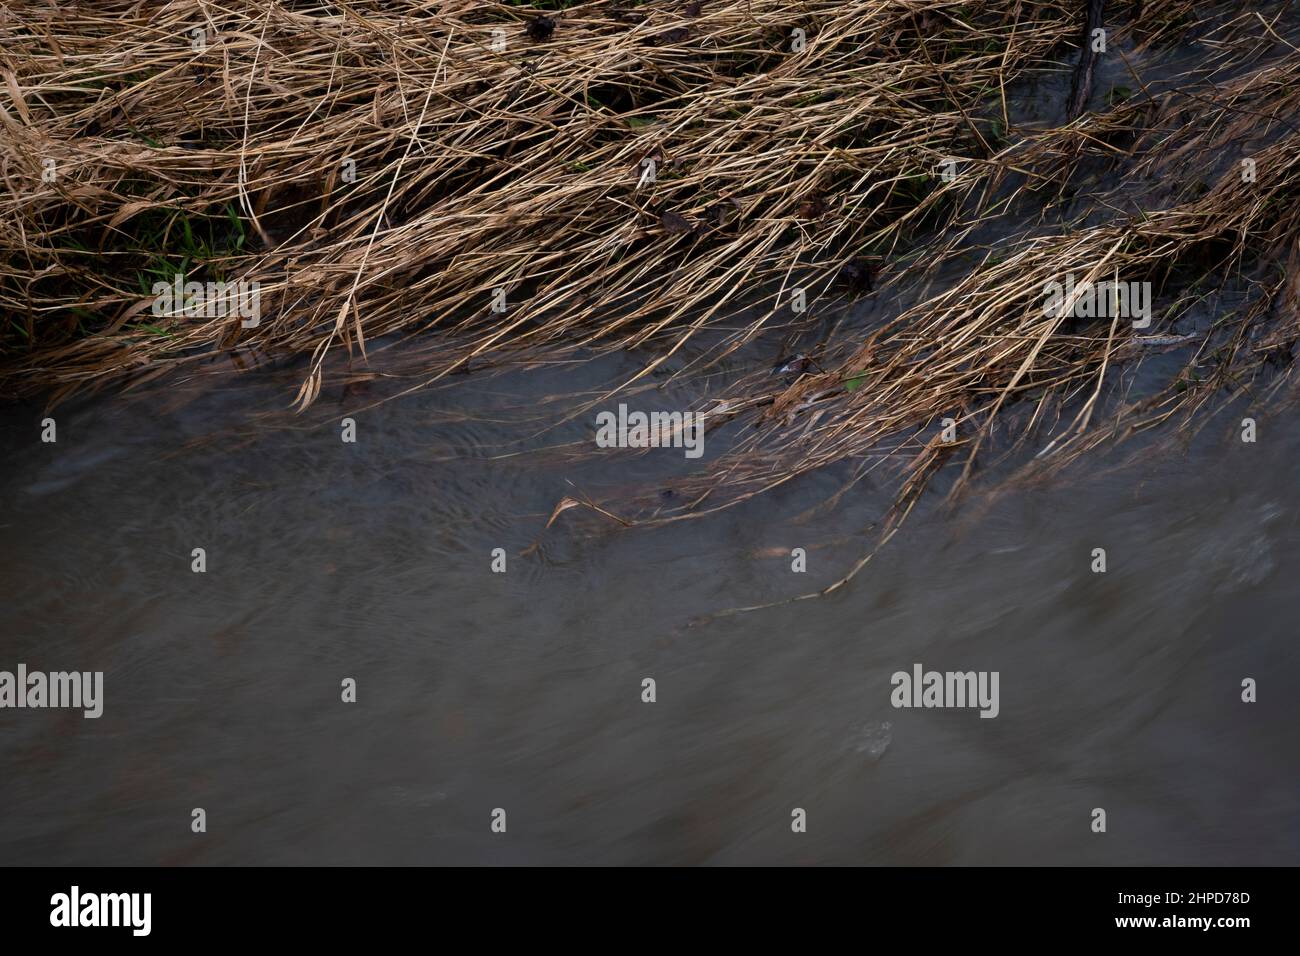 River bank reeds in the winter with fast flowing water rushing by on ...